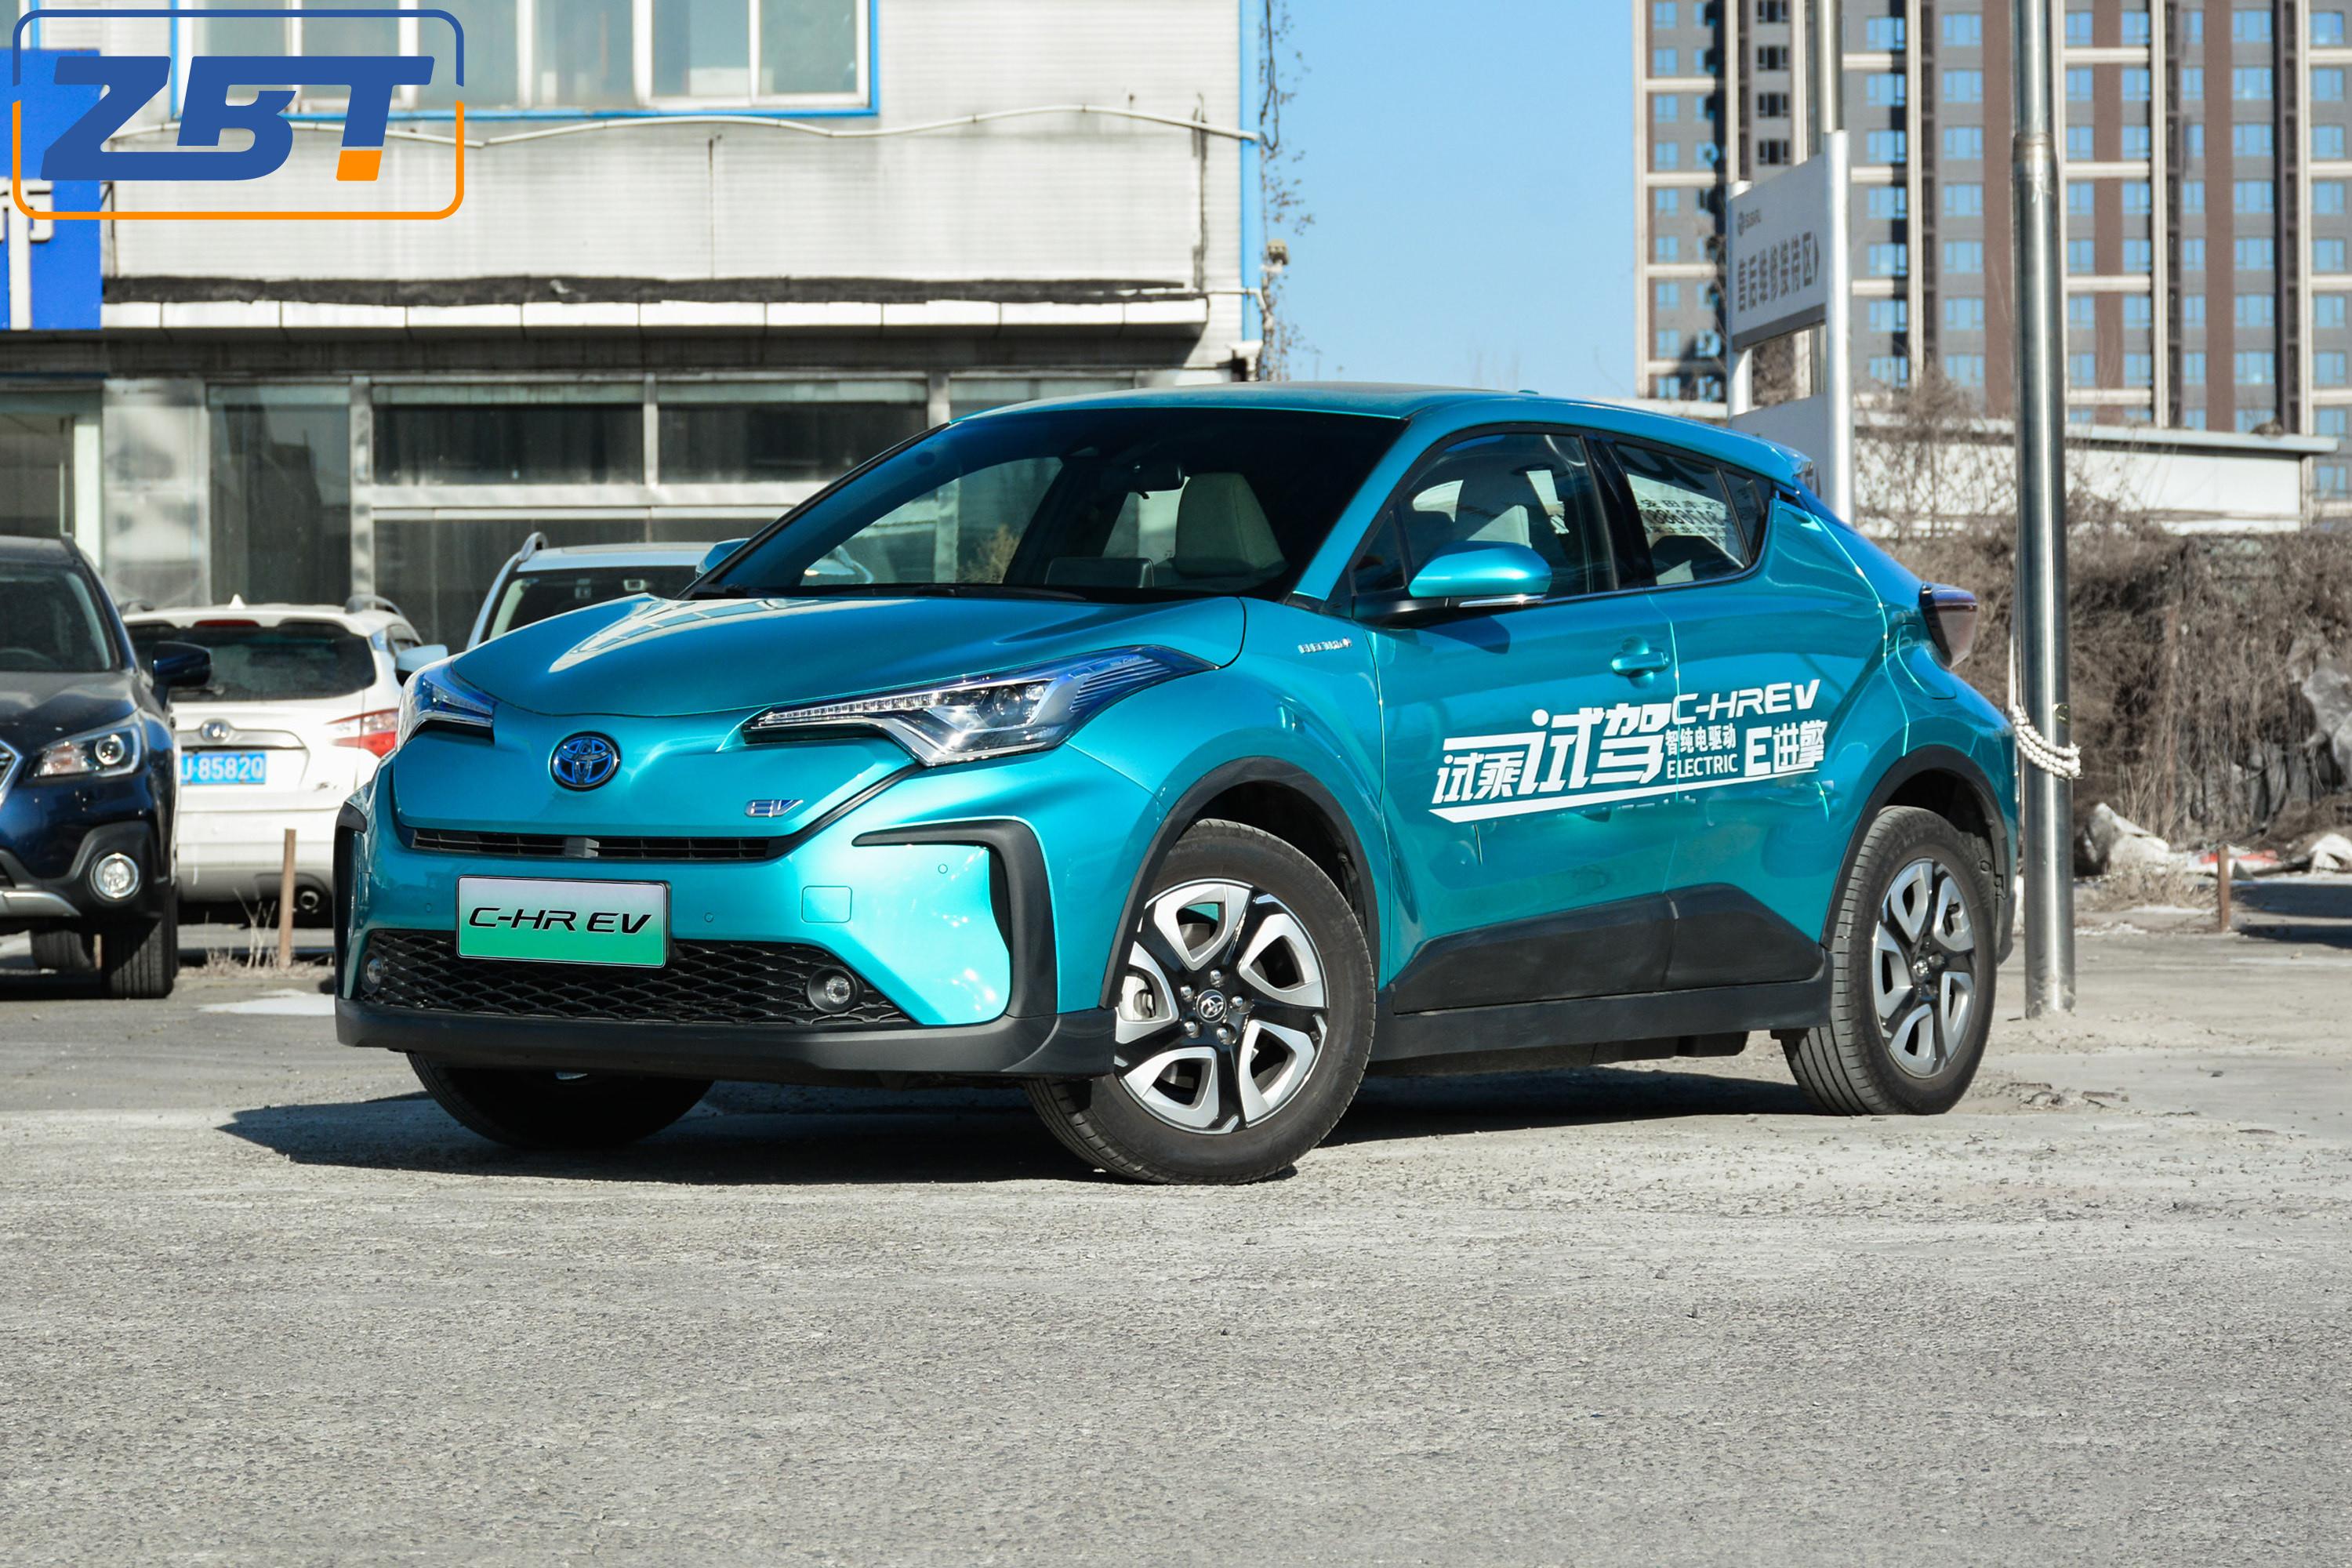 Sport Electric Vehicle Smart Luxury C-HR EV Electric Car Many Airbags PM2.5 Filter SUV with Front Rear Parking Radar